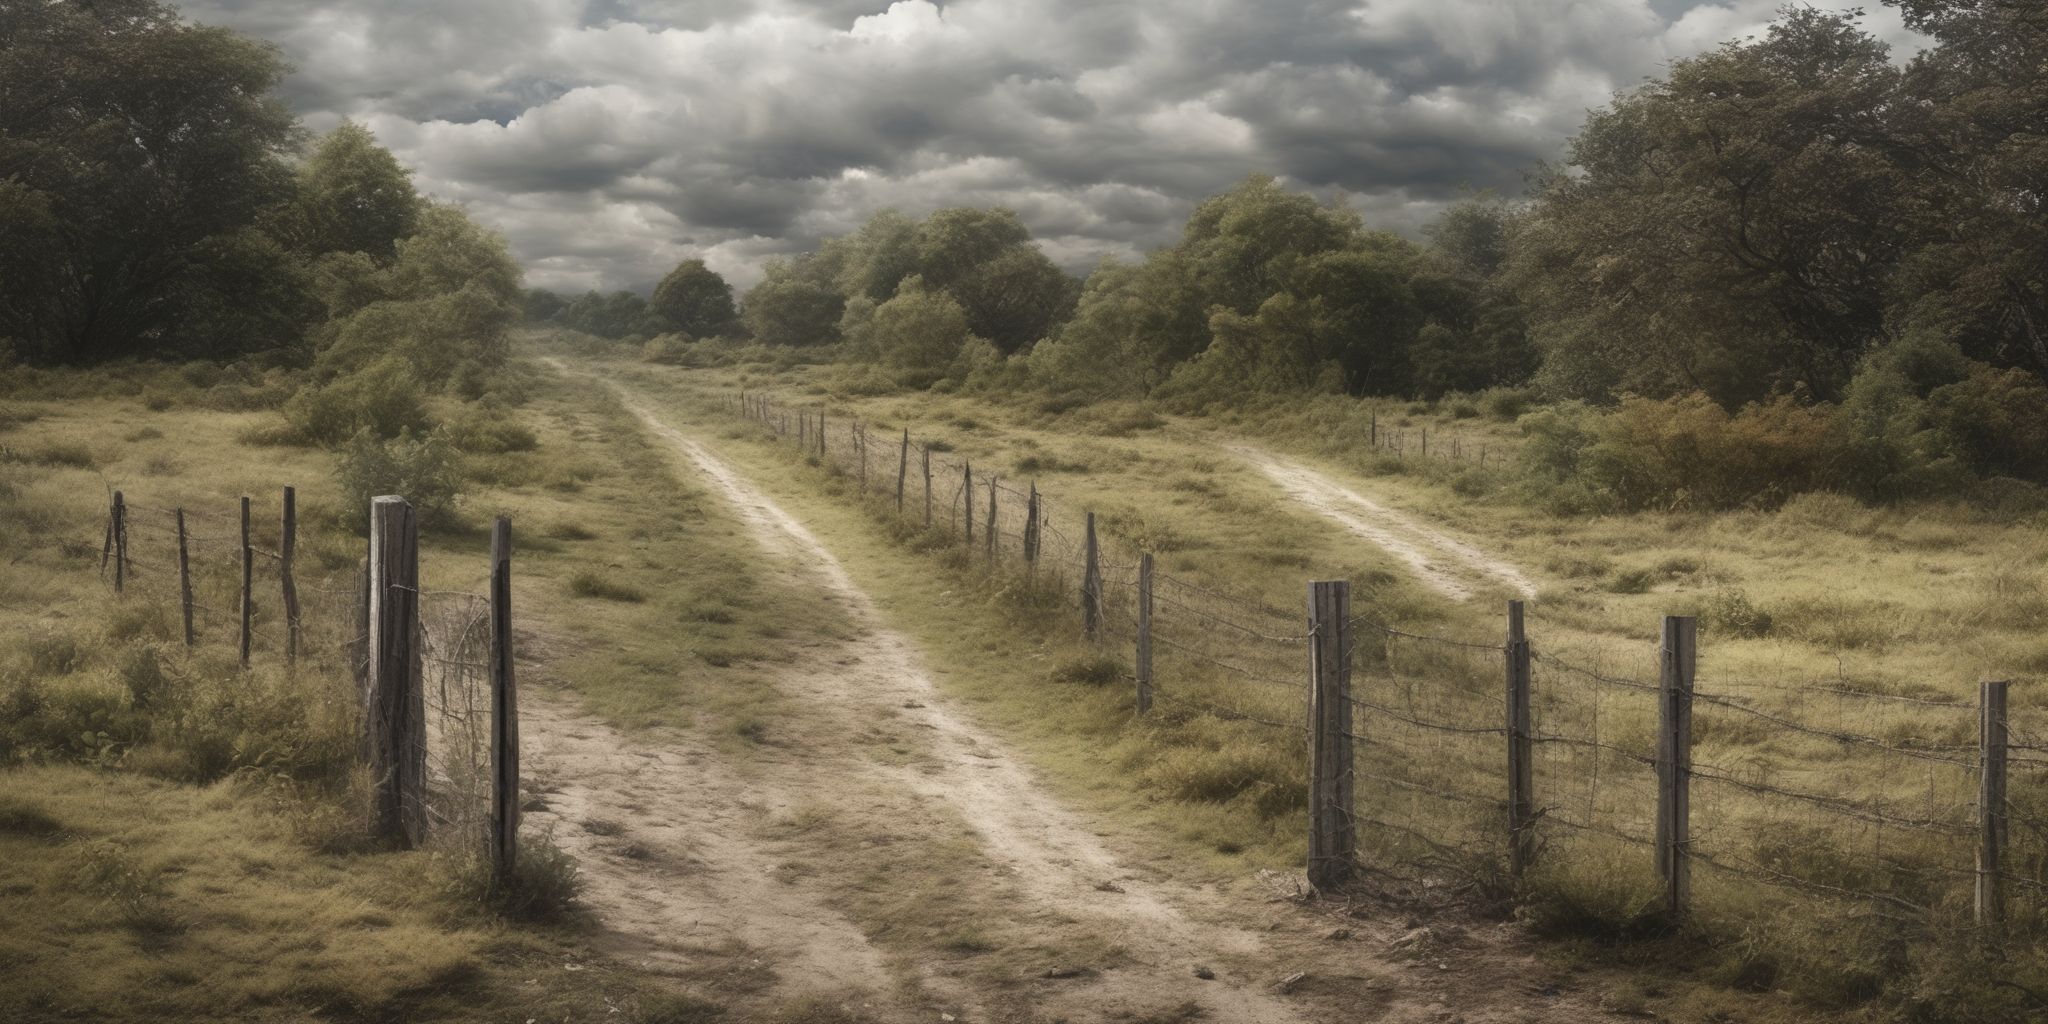 Boundary  in realistic, photographic style